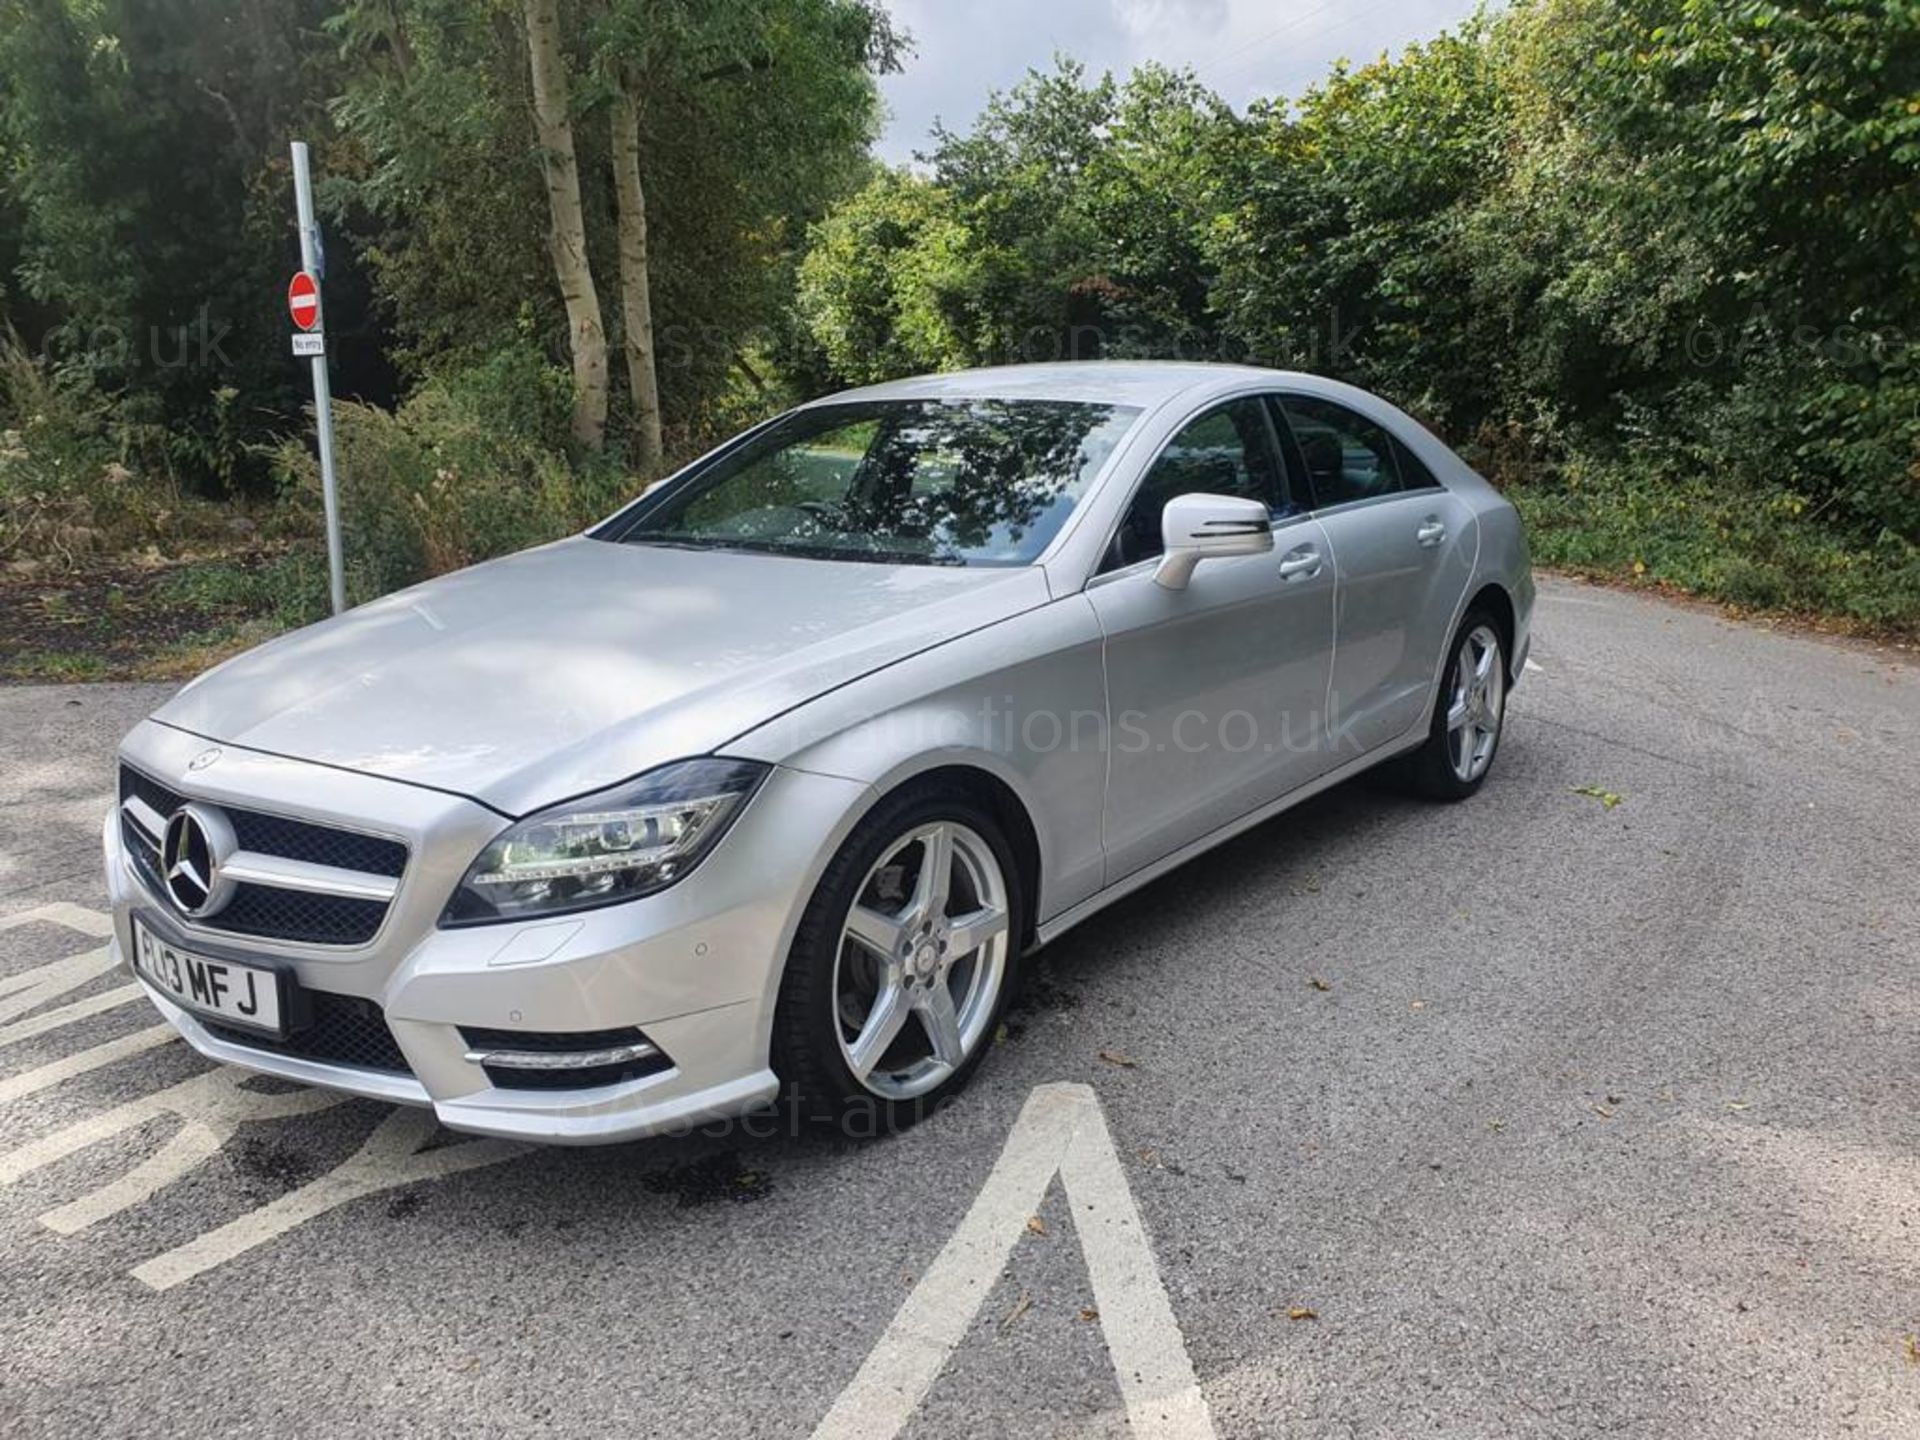 2013 MERCEDES-BENZ CLS250 CDI AMG BLUE-CY SPORT SILVER COUPE, 2.2 DIESEL, 45,952 MILES *NO VAT* - Image 3 of 34